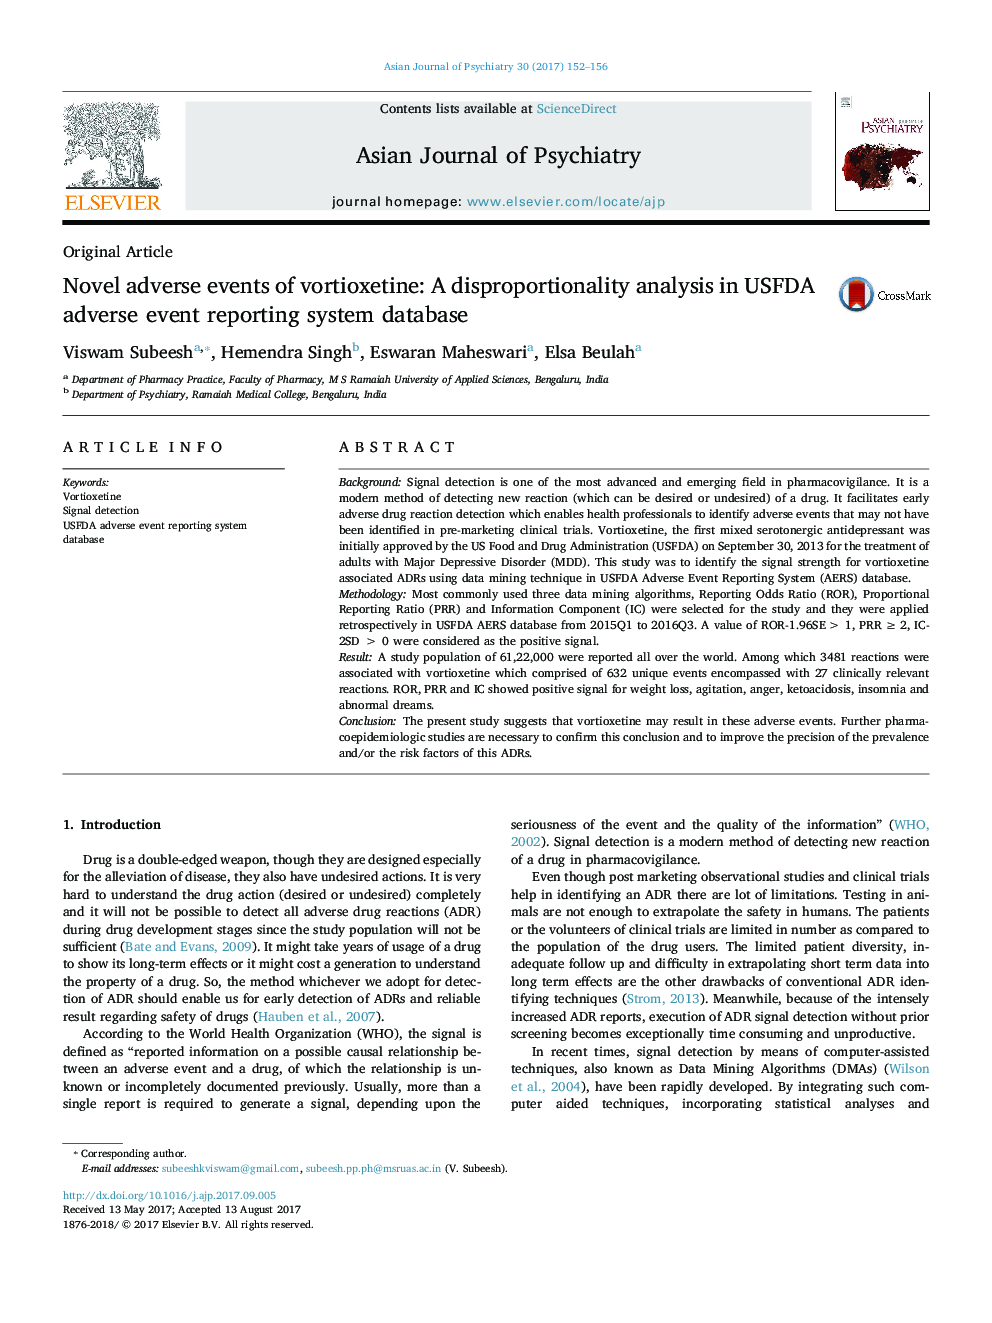 Novel adverse events of vortioxetine: A disproportionality analysis in USFDA adverse event reporting system database